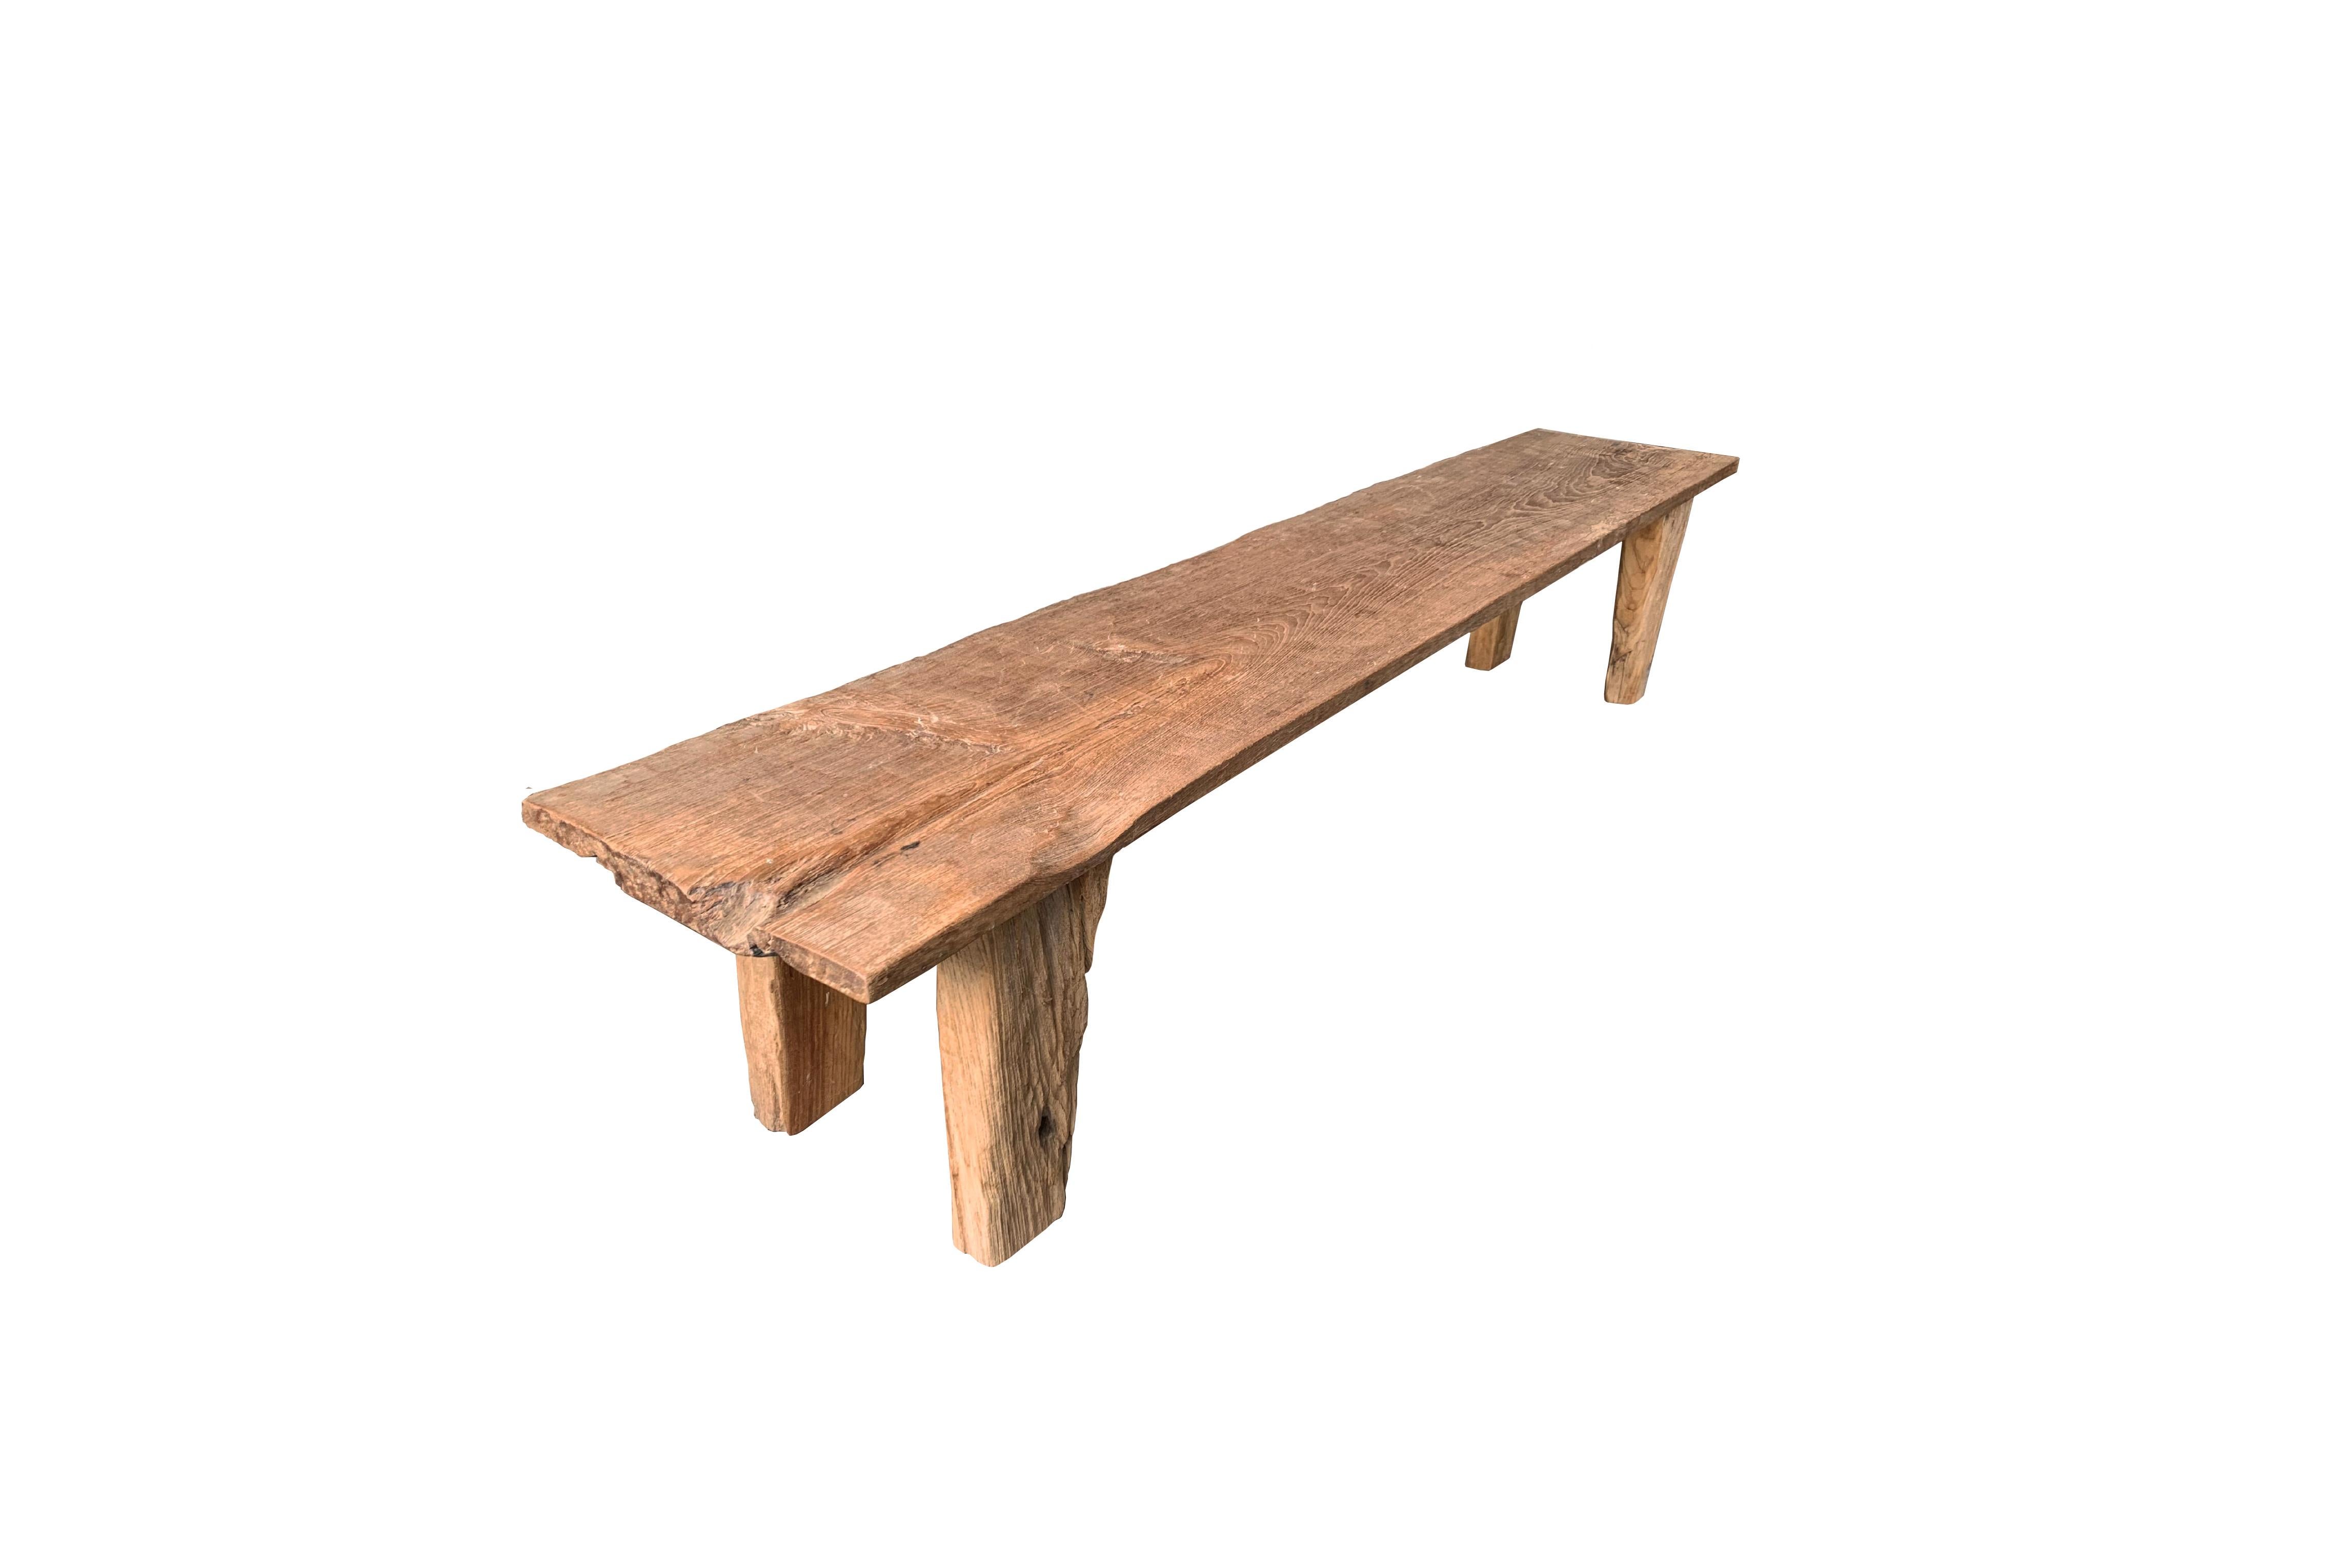 This teak wood bench originates from the Island of Madura, off the coast of Northeastern Java. It features a wonderful organic form with a mix of wood textures and shades. Elevated by four solid, angular legs, the seat was carved from a single block